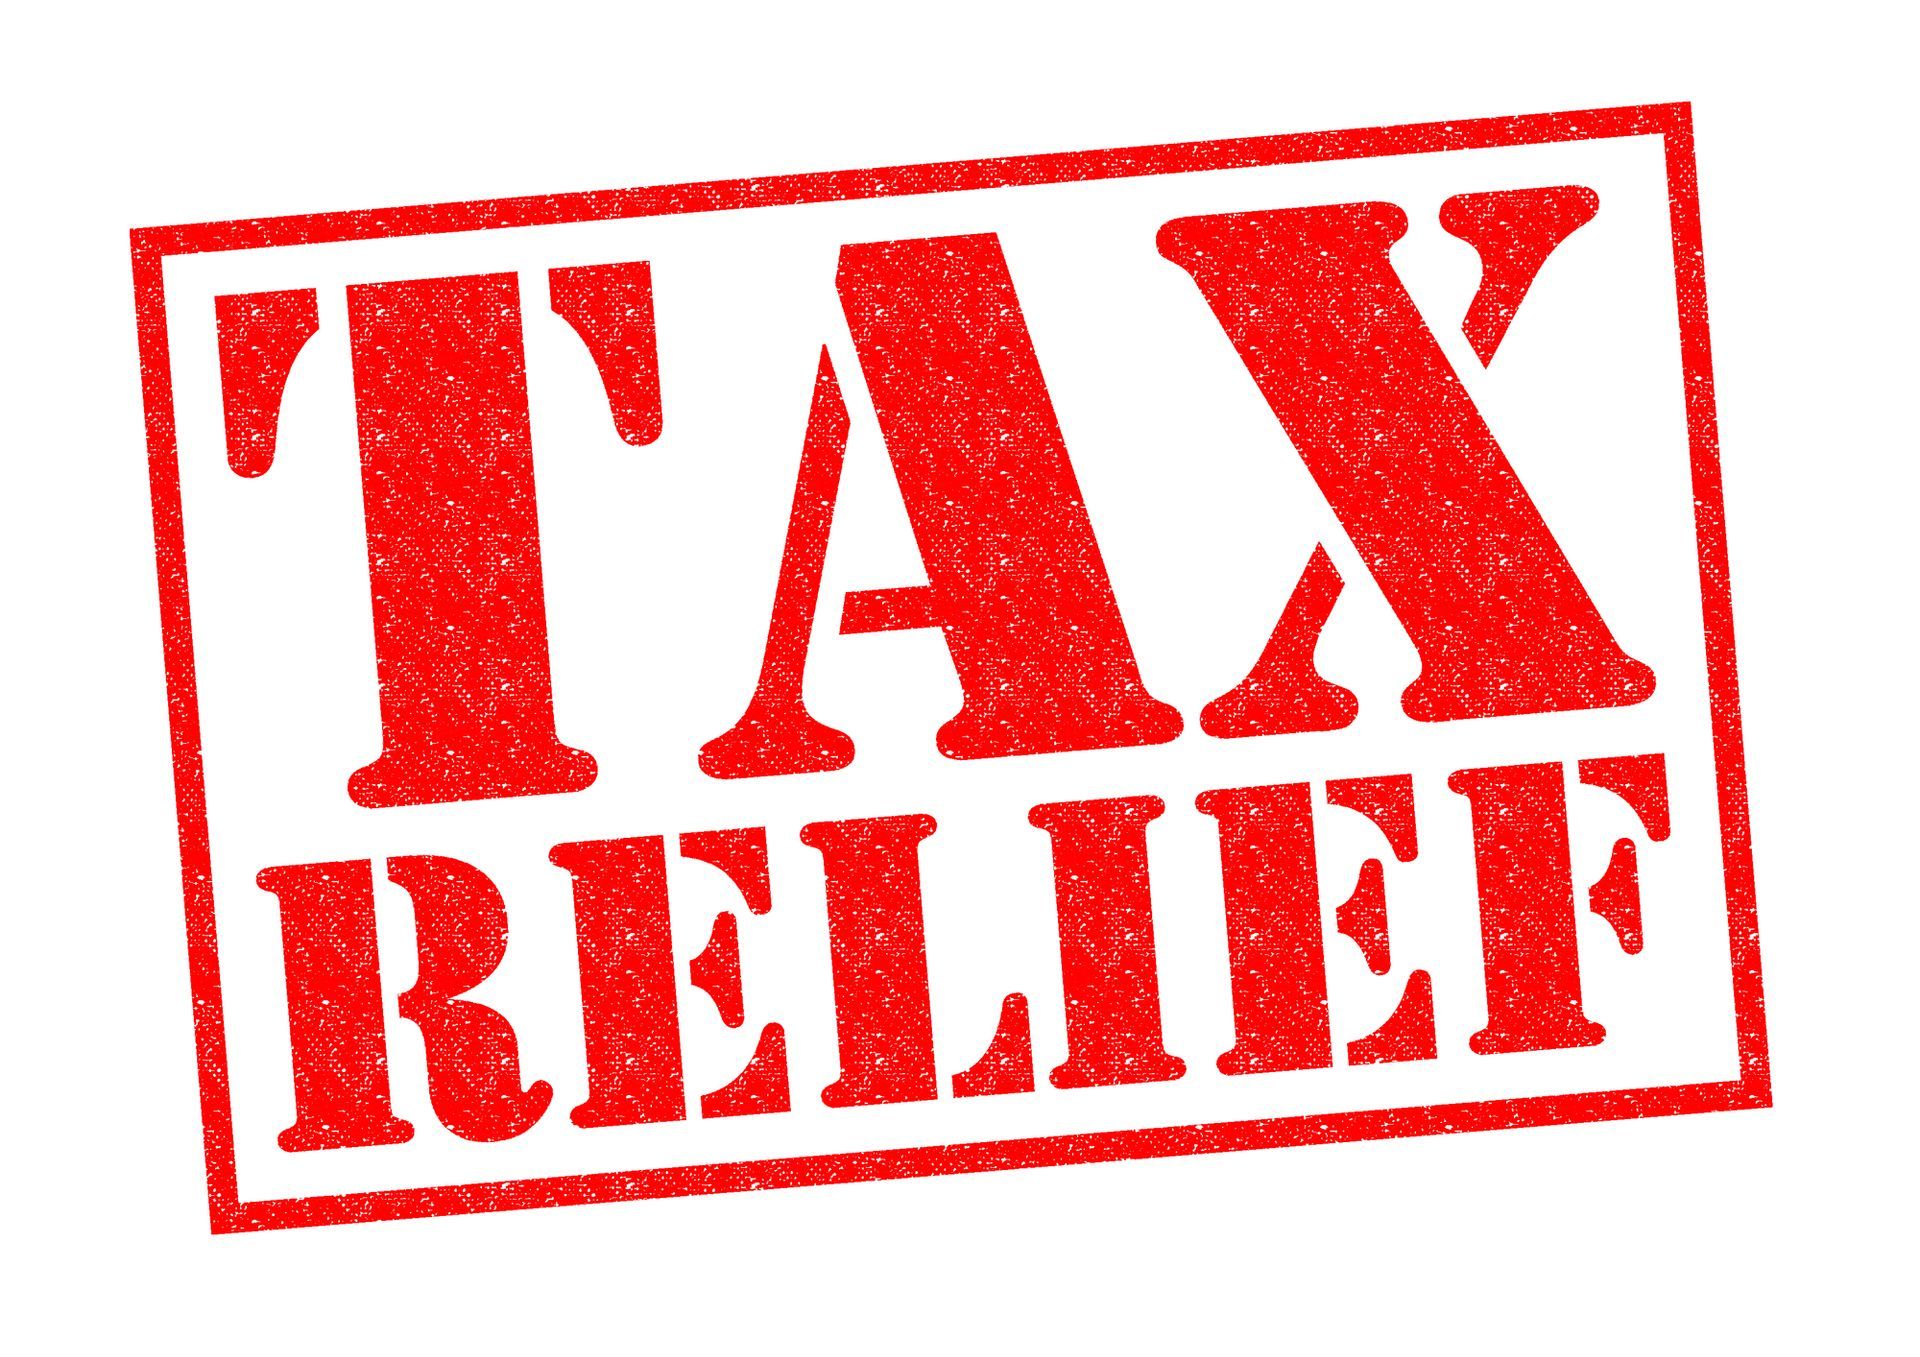 Tax Relief written in red